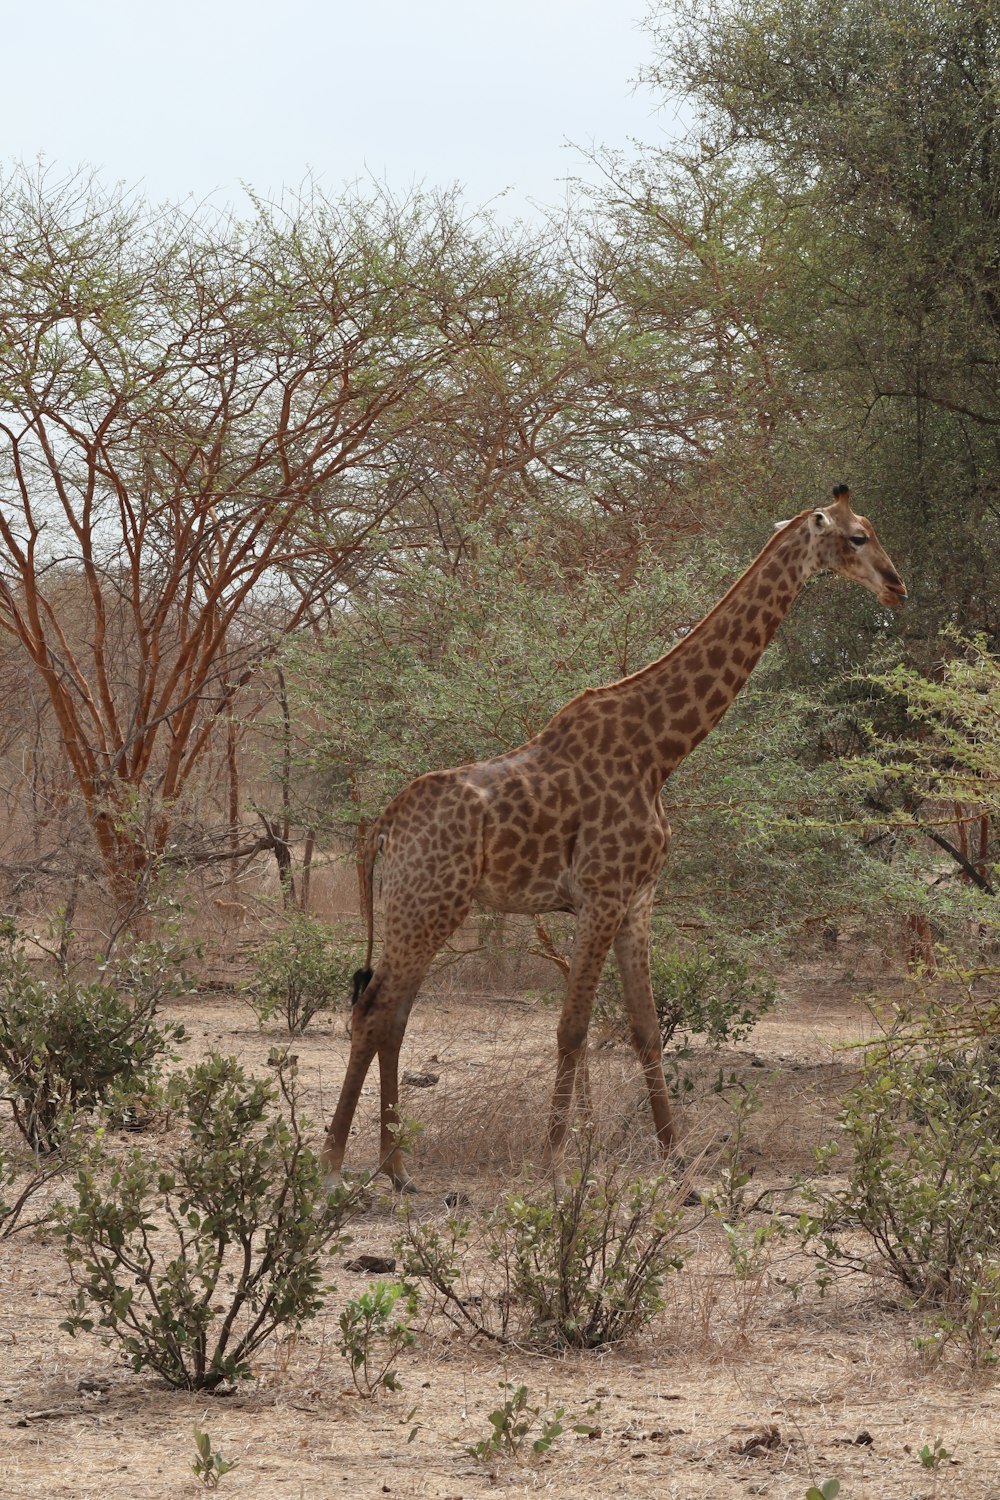 a giraffe walking through a field with trees in the background